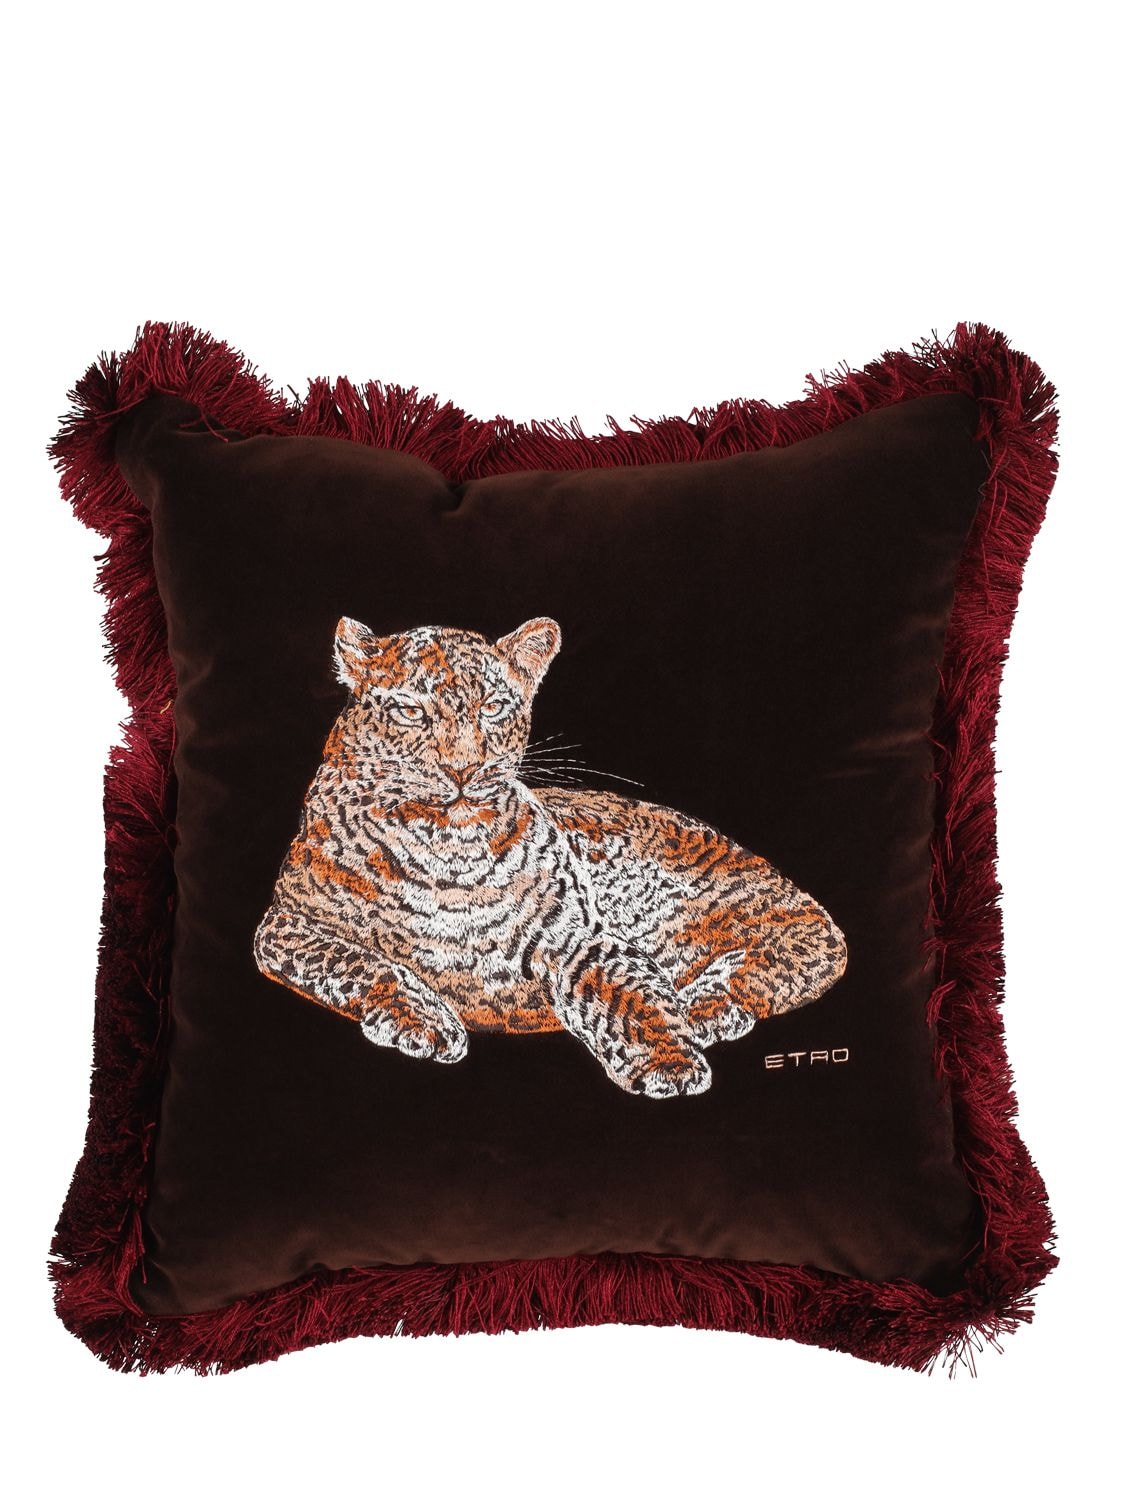 Etro Embroidered Cushion In Brown